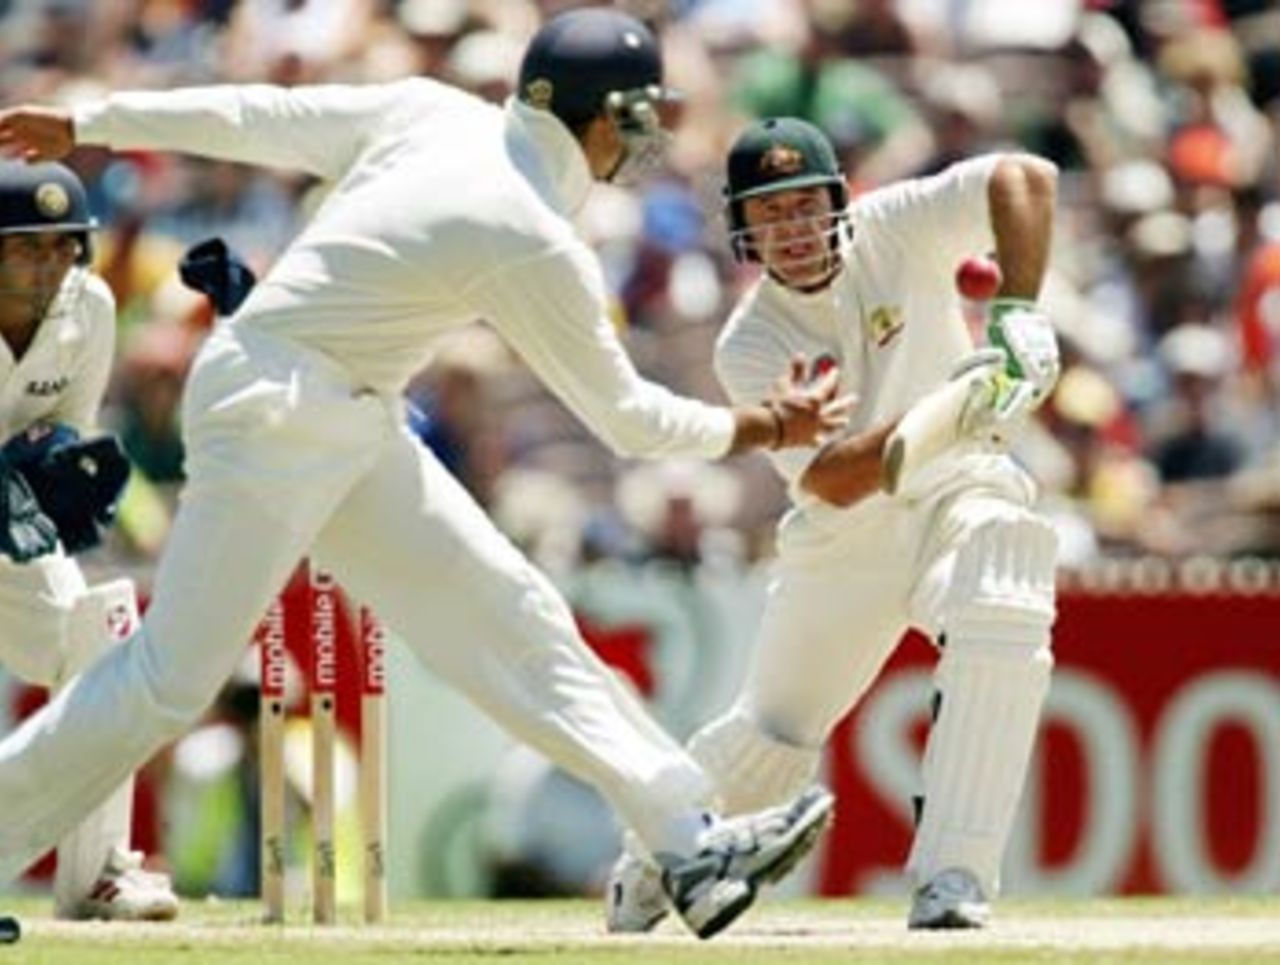 Ricky Ponting continued from where he left off in the first innings, Australia v India, 3rd Test, Melbourne, 5th day, December 30, 2003